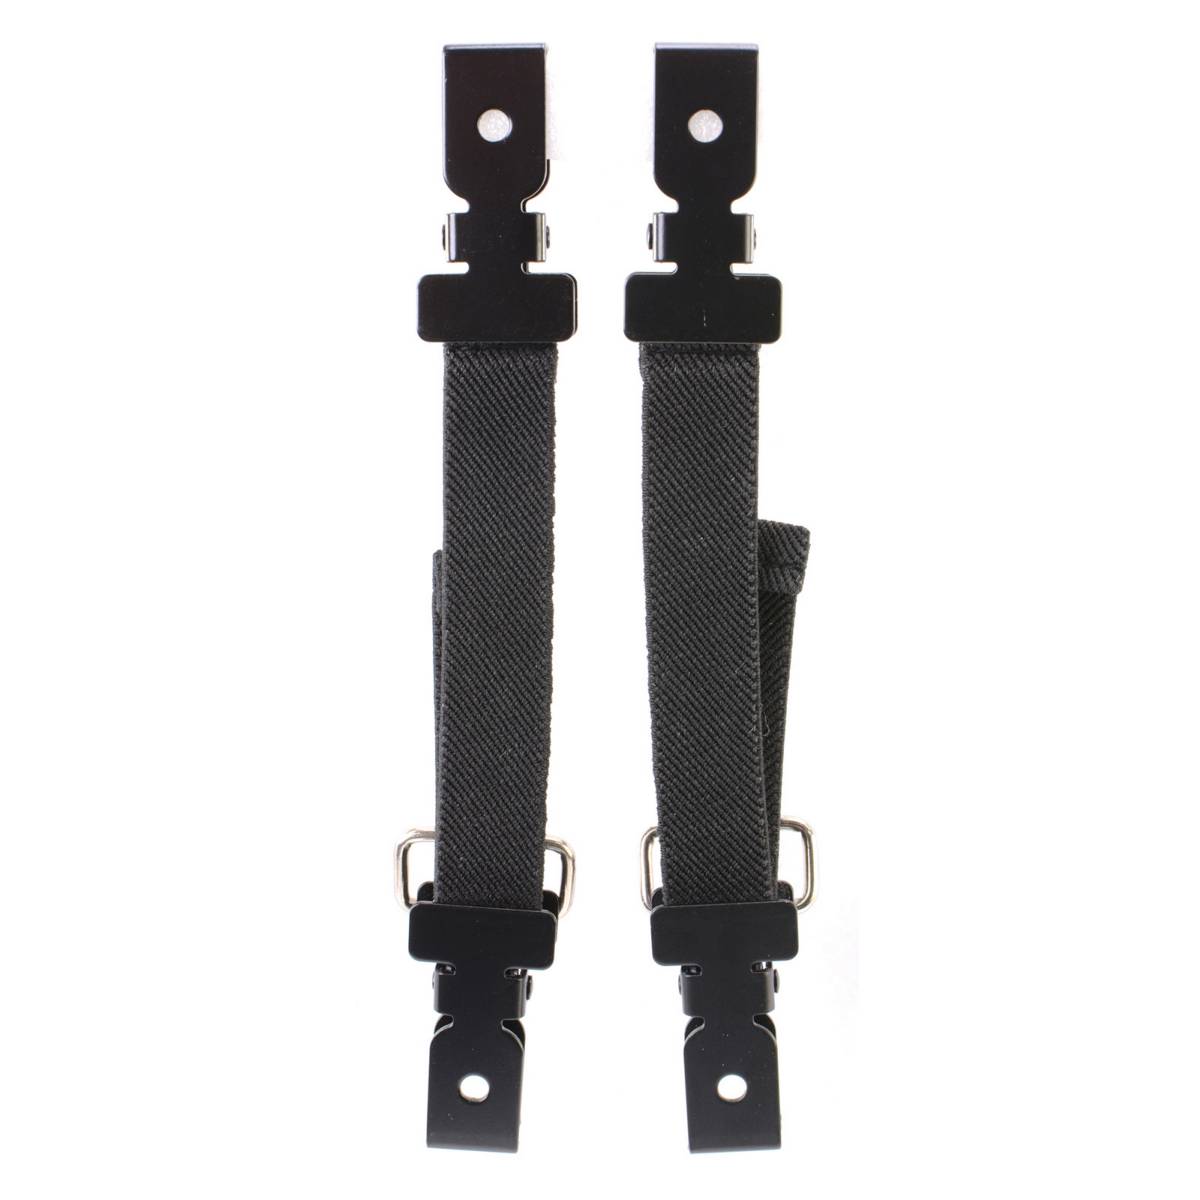 Milwaukee Leather MLA4010 Motorcycle Biker Plain Black Elastic Bungee Clips for Chaps or Pants (Set of 2)